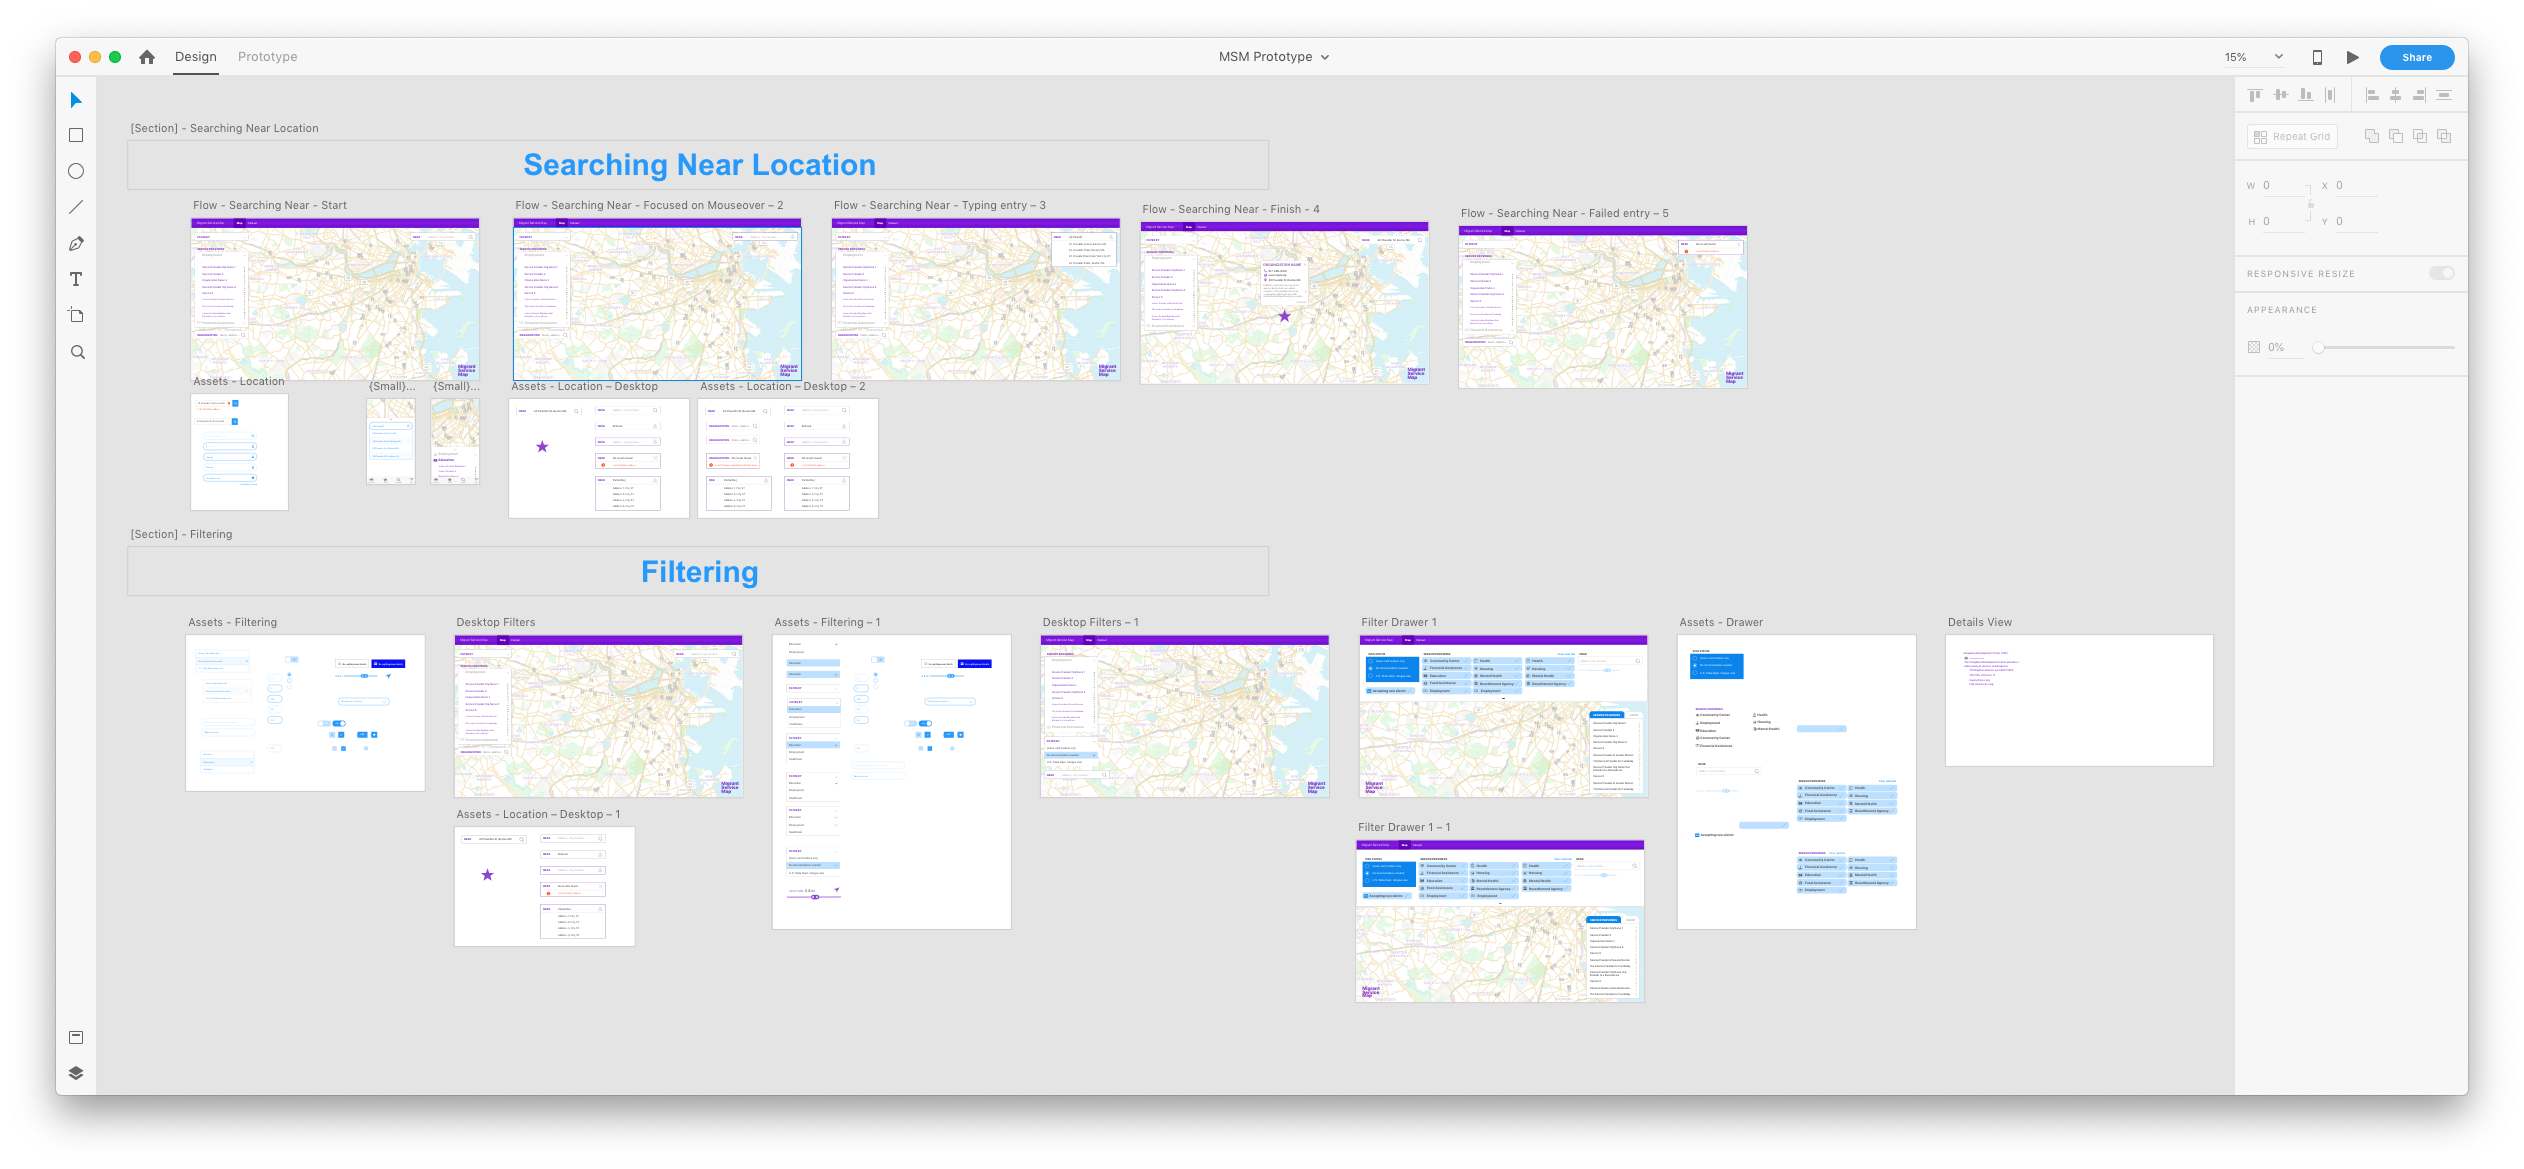 Several artboards from Adobe XD file with app designs in progress